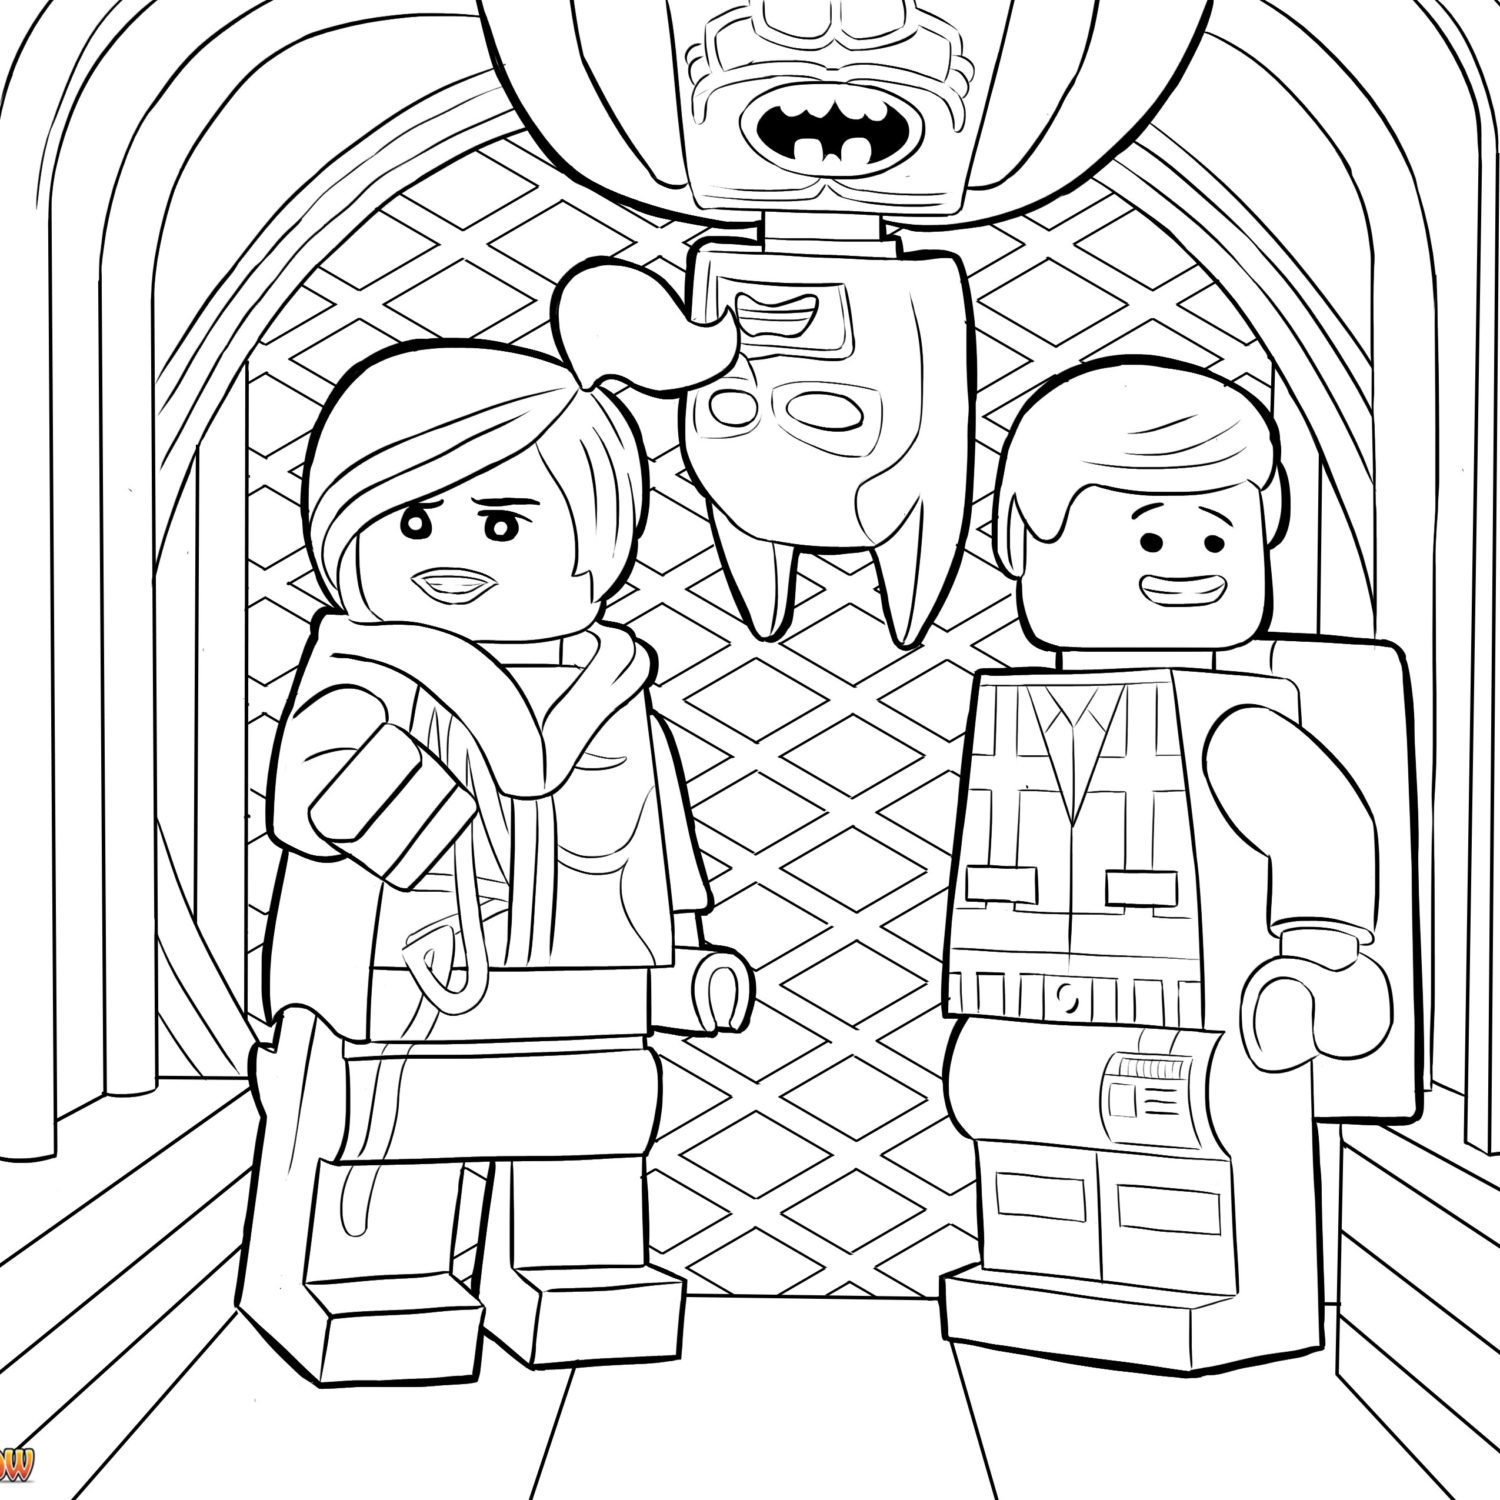 Lego Justice League Coloring Pages at GetColorings.com | Free printable ...